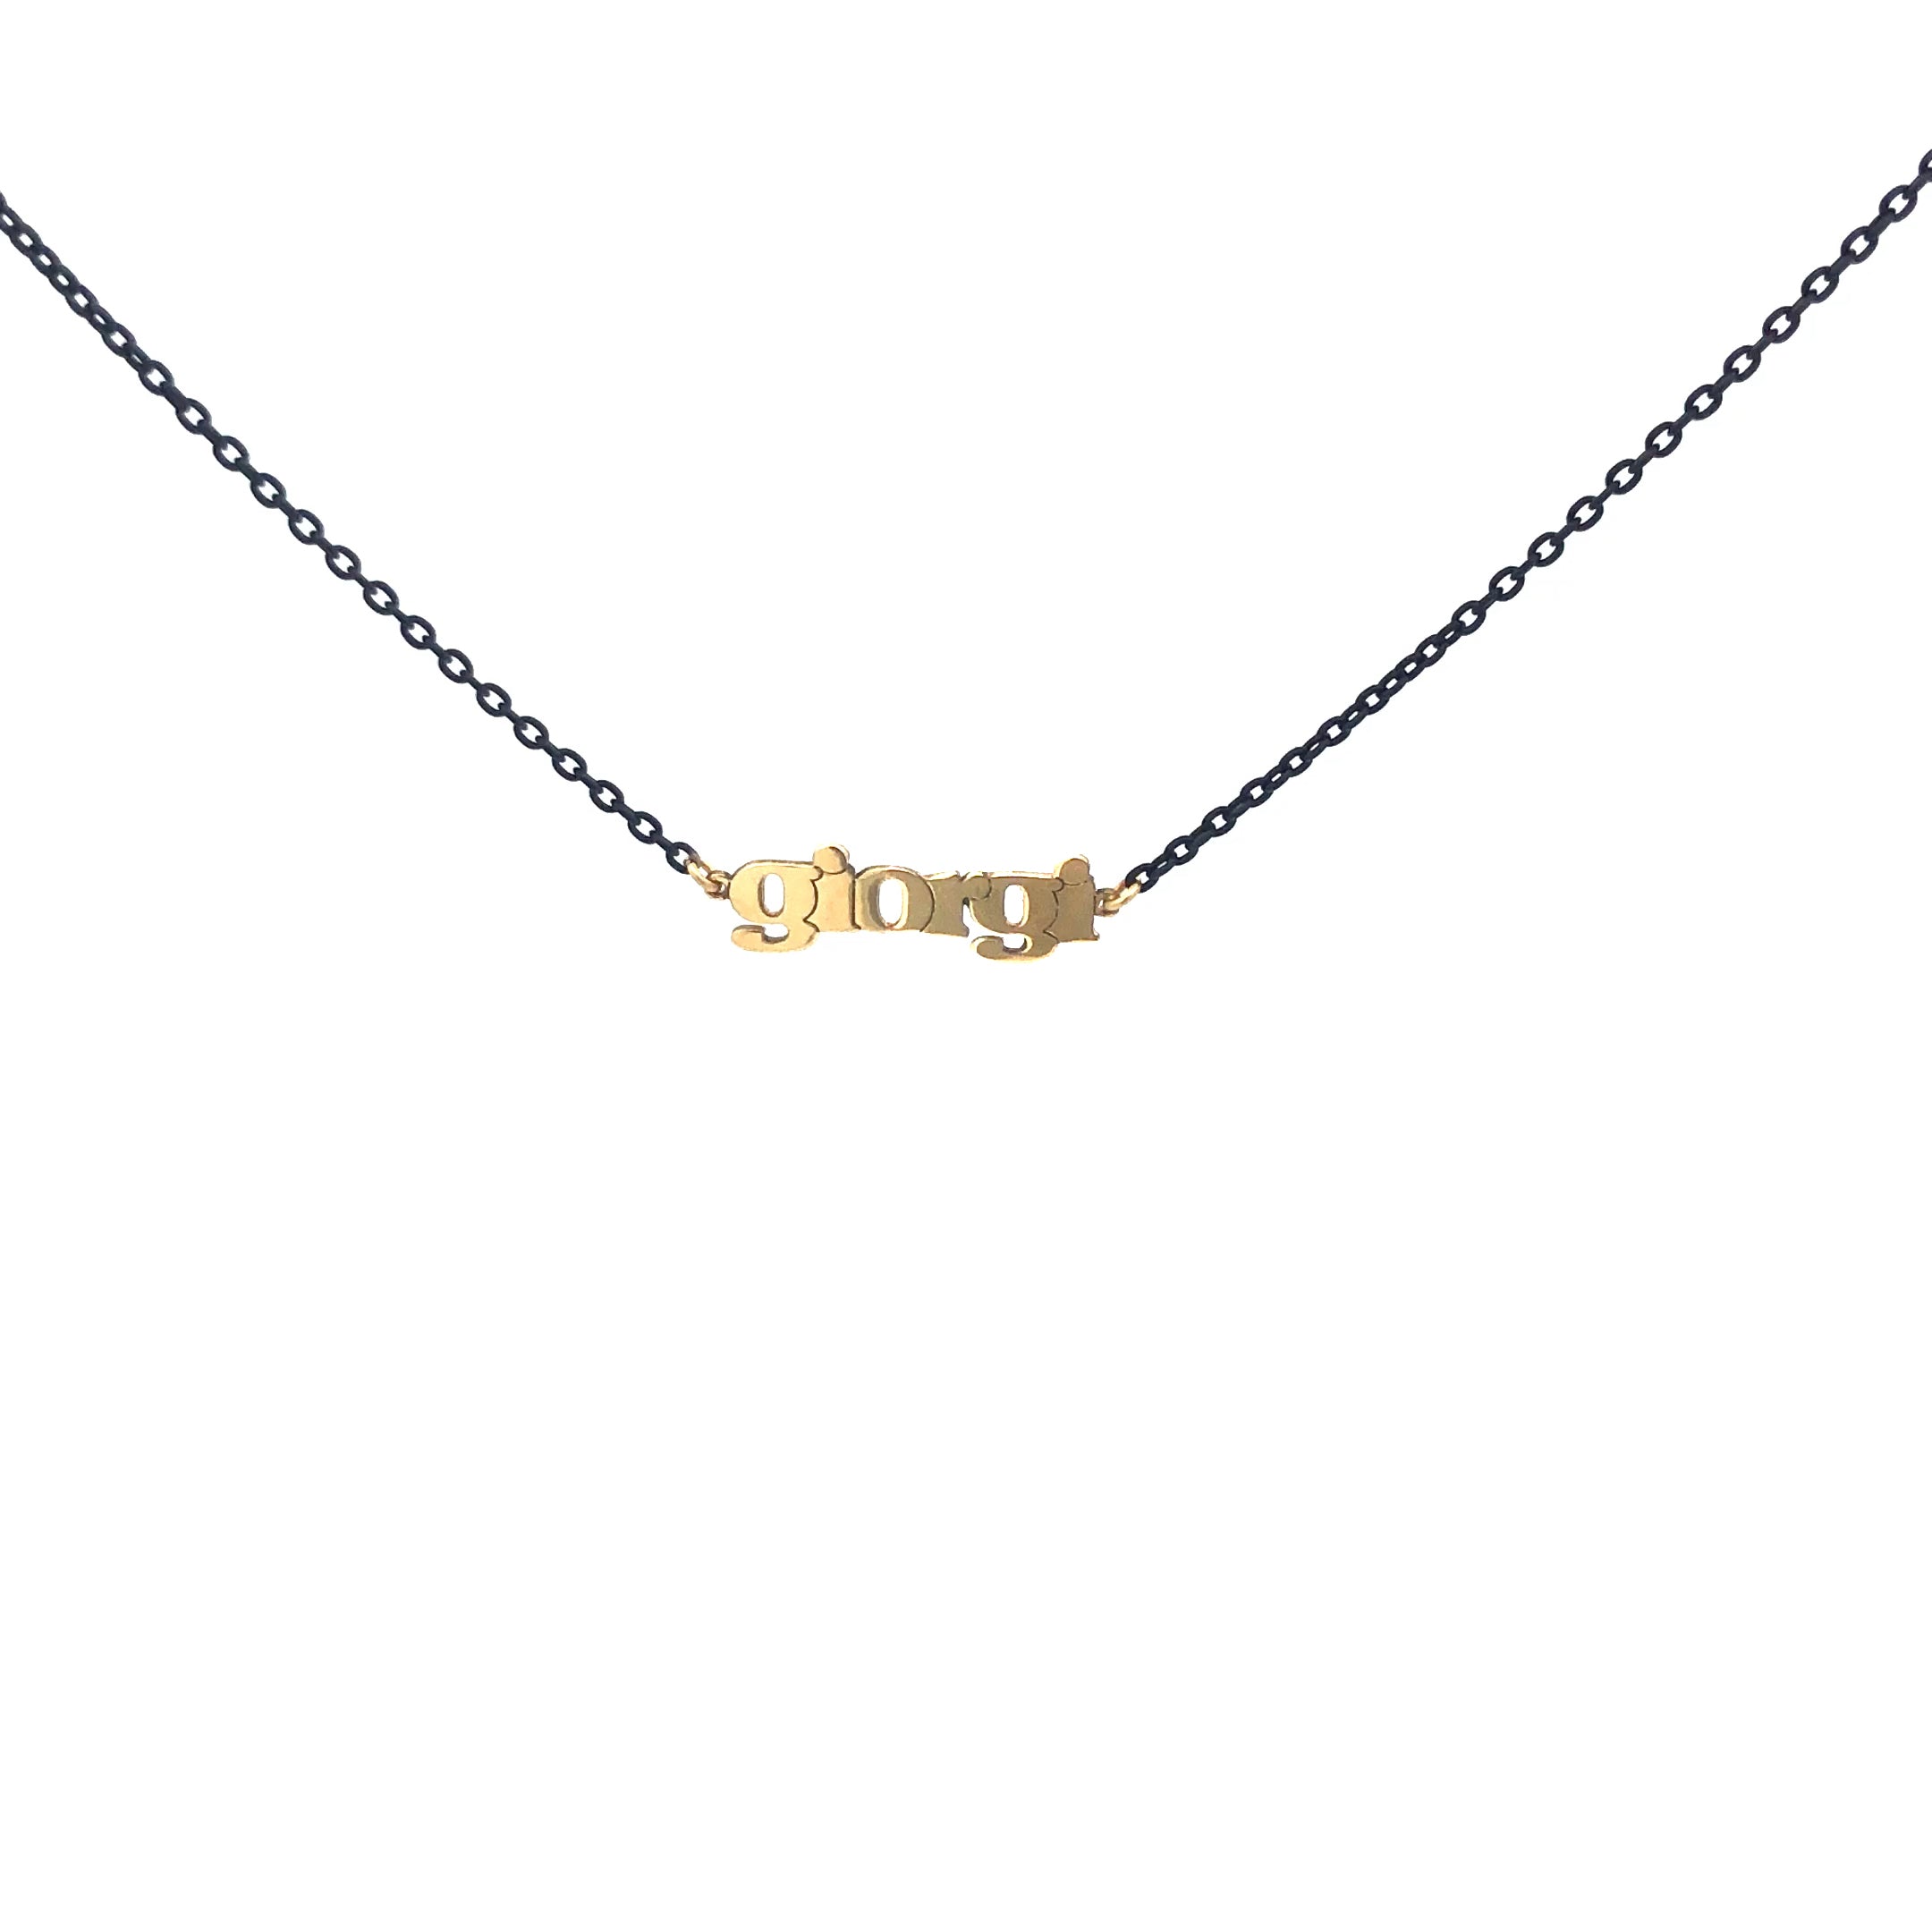 Chokers - Customizable Golden Mate choker colored chain – ORO18KT - 4 | Rue des Mille